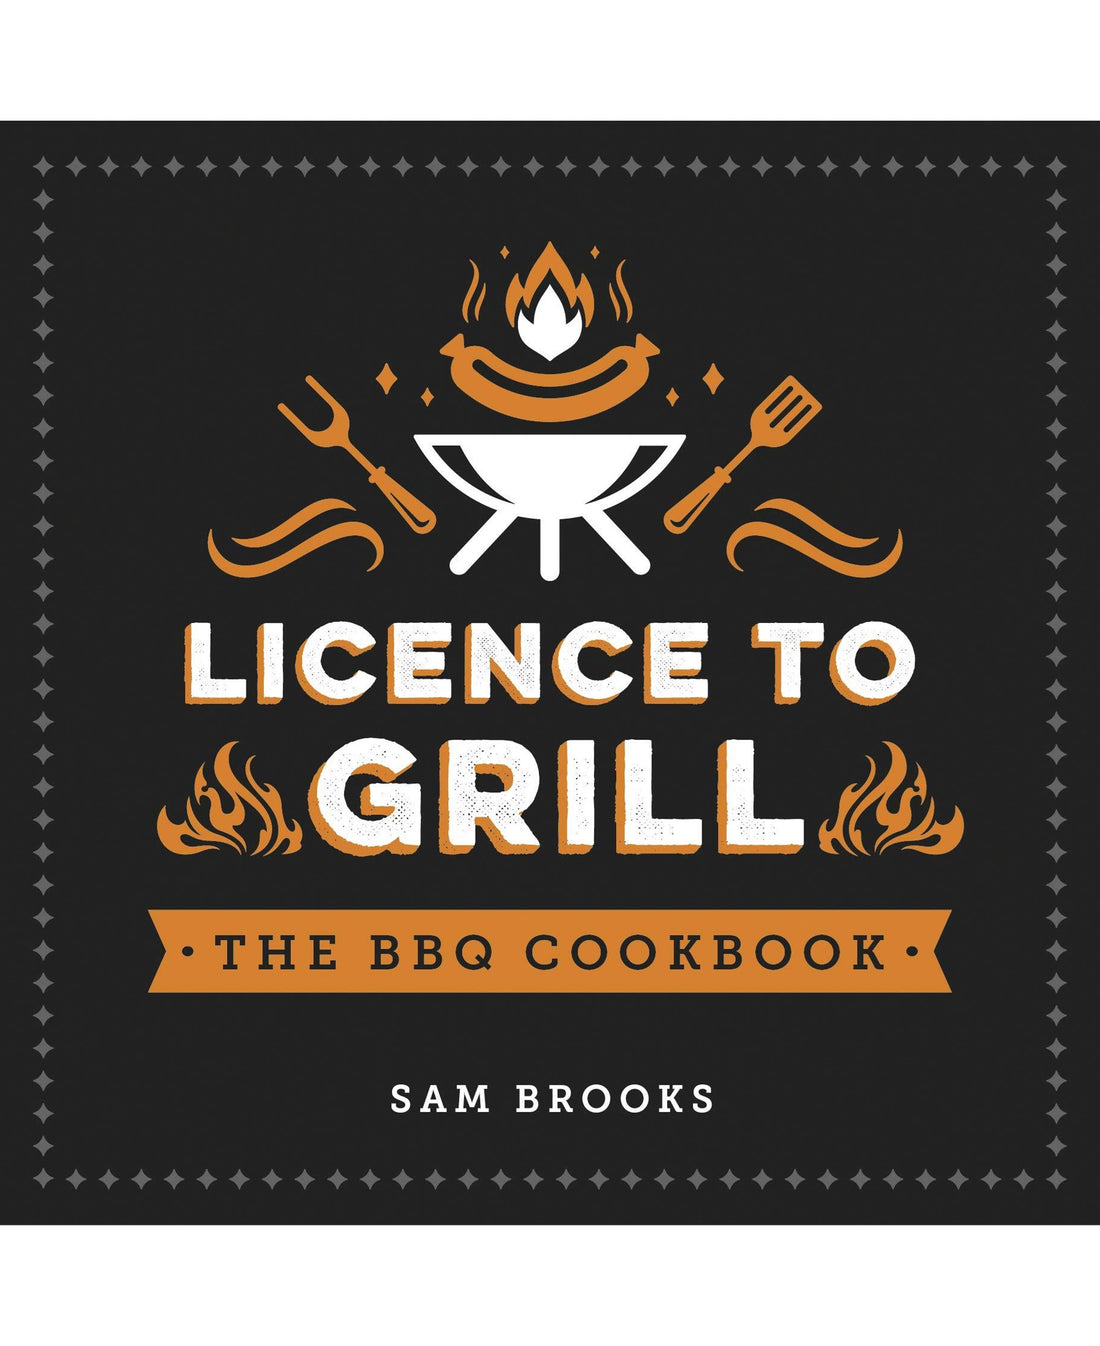 Licence To Grill by Sam Brooks